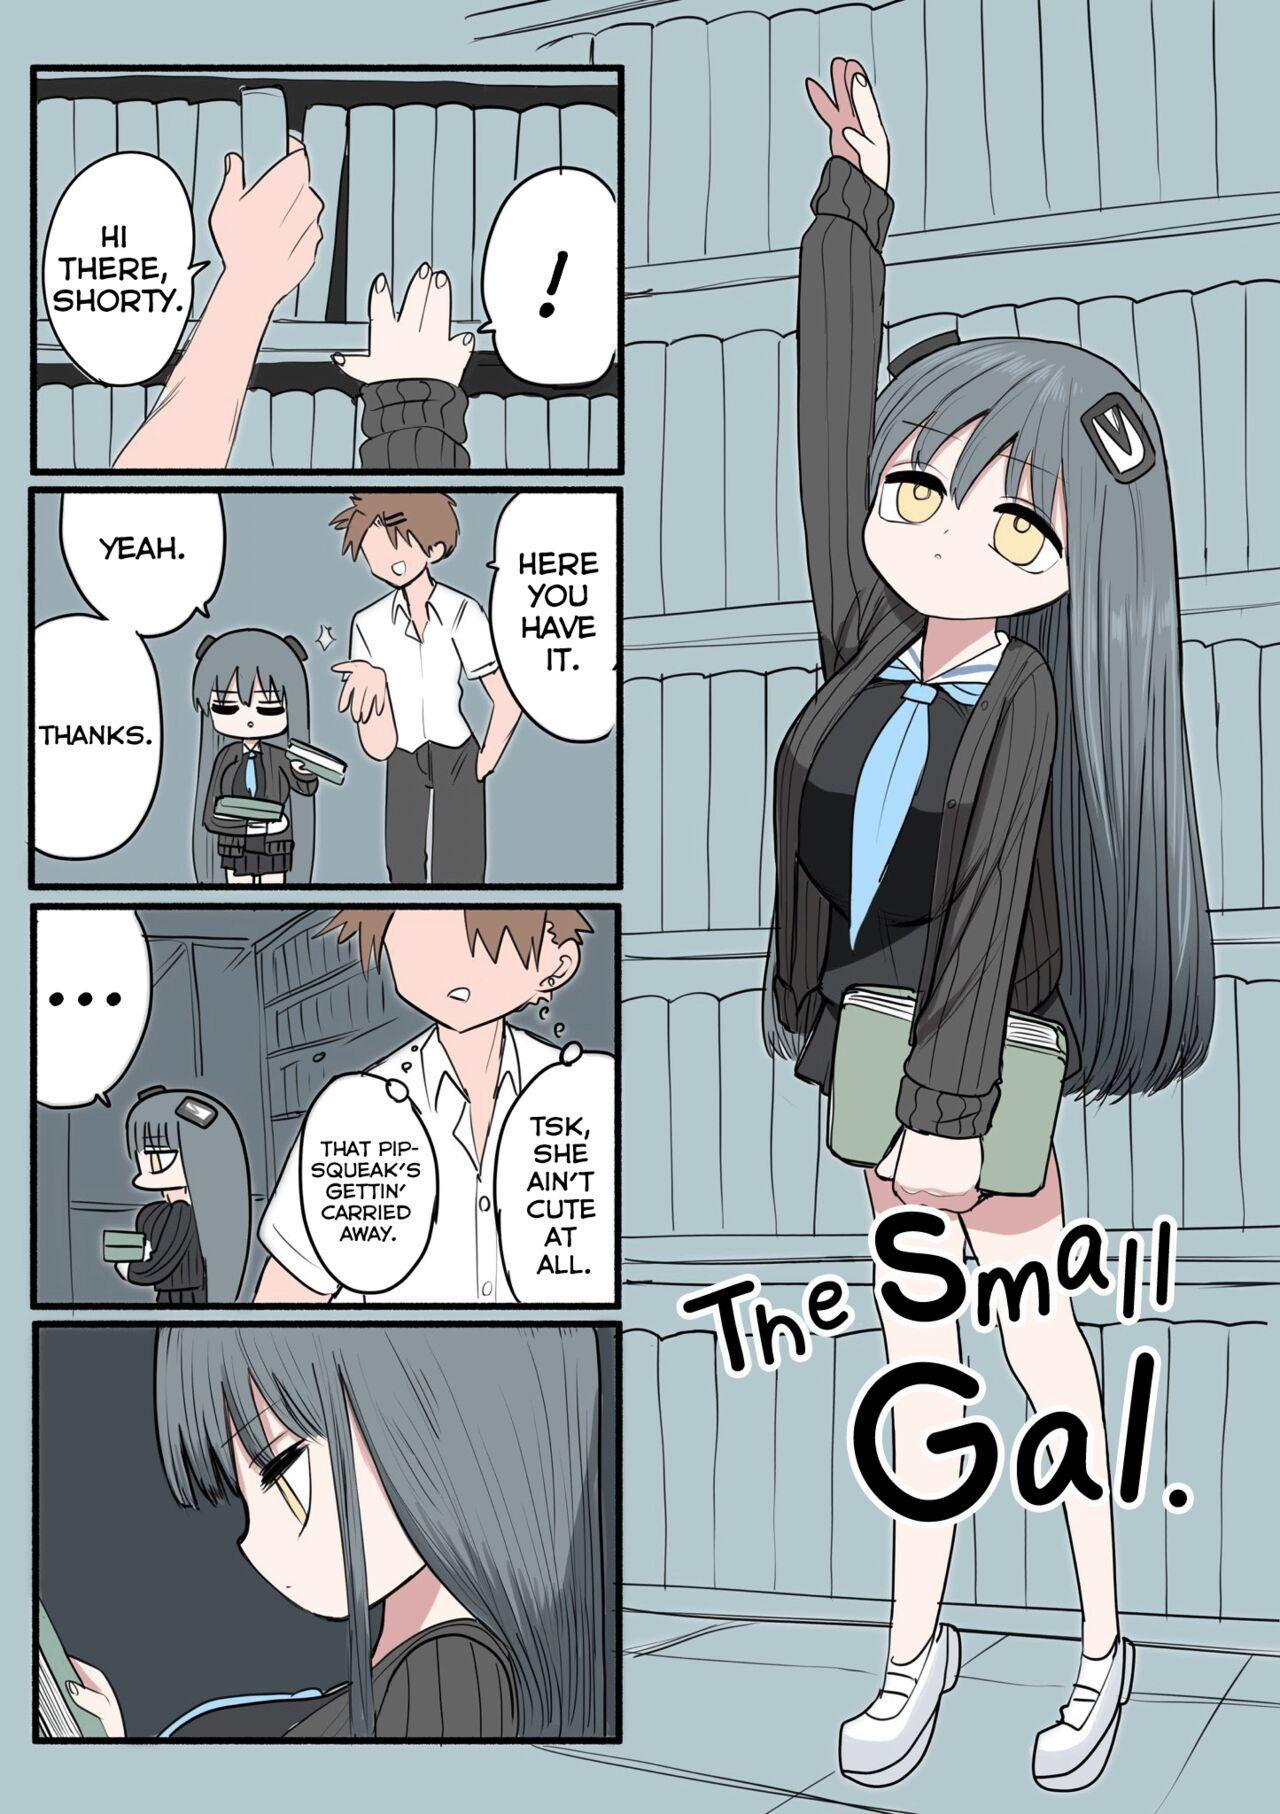 Chiisai Gal | The Small Gal 63